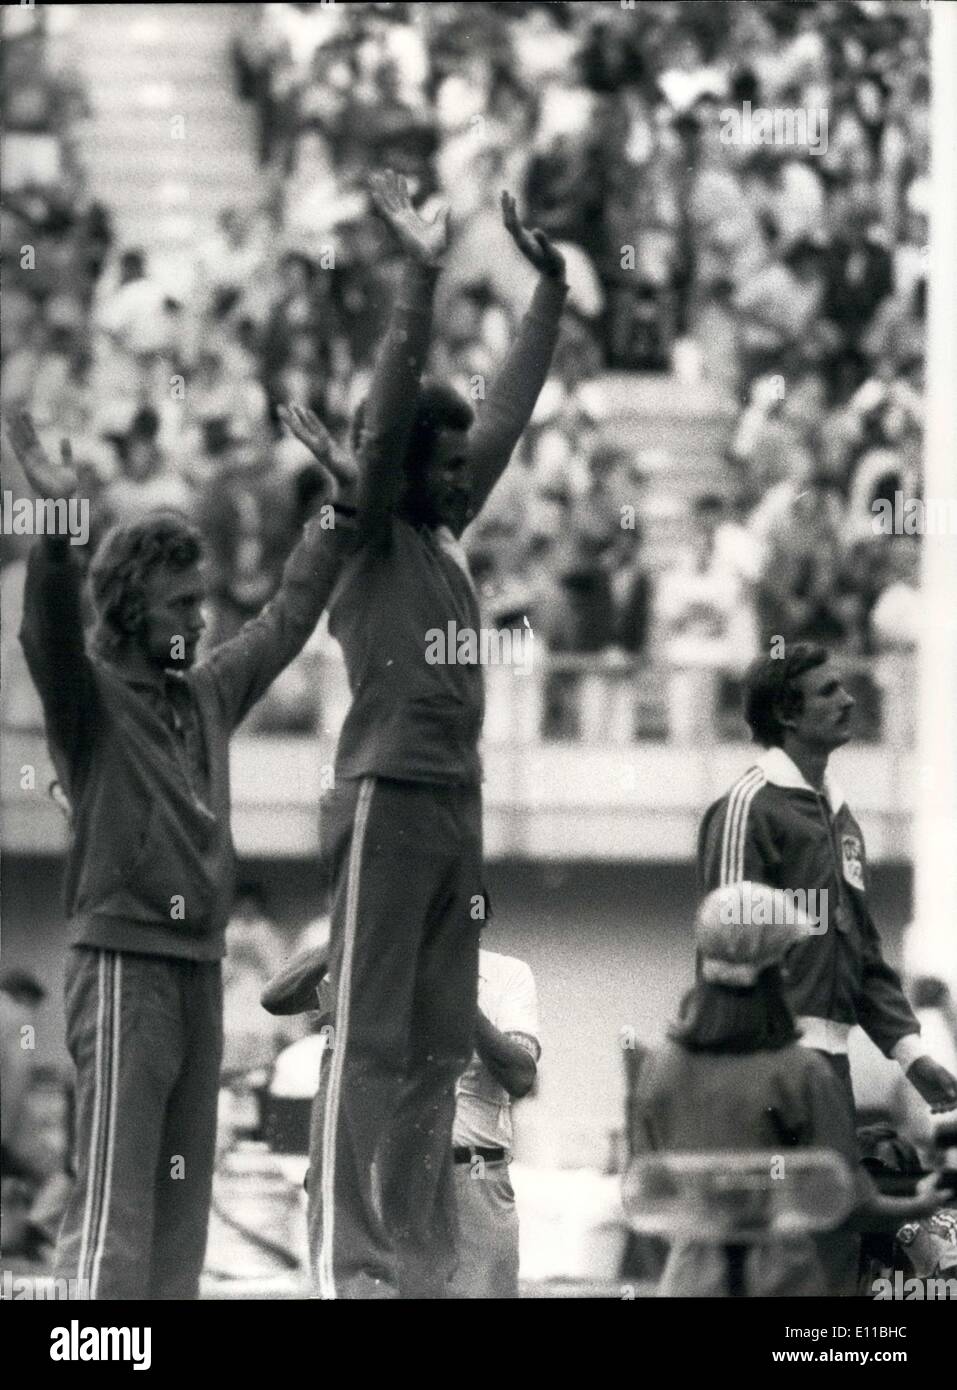 Jul. 27, 1976 - The Cuban athlete Juantorena won the gold medal in the 800 meter race at the Montreal Olympics. Damme (silver) and Wohlhuter (bronze) Stock Photo